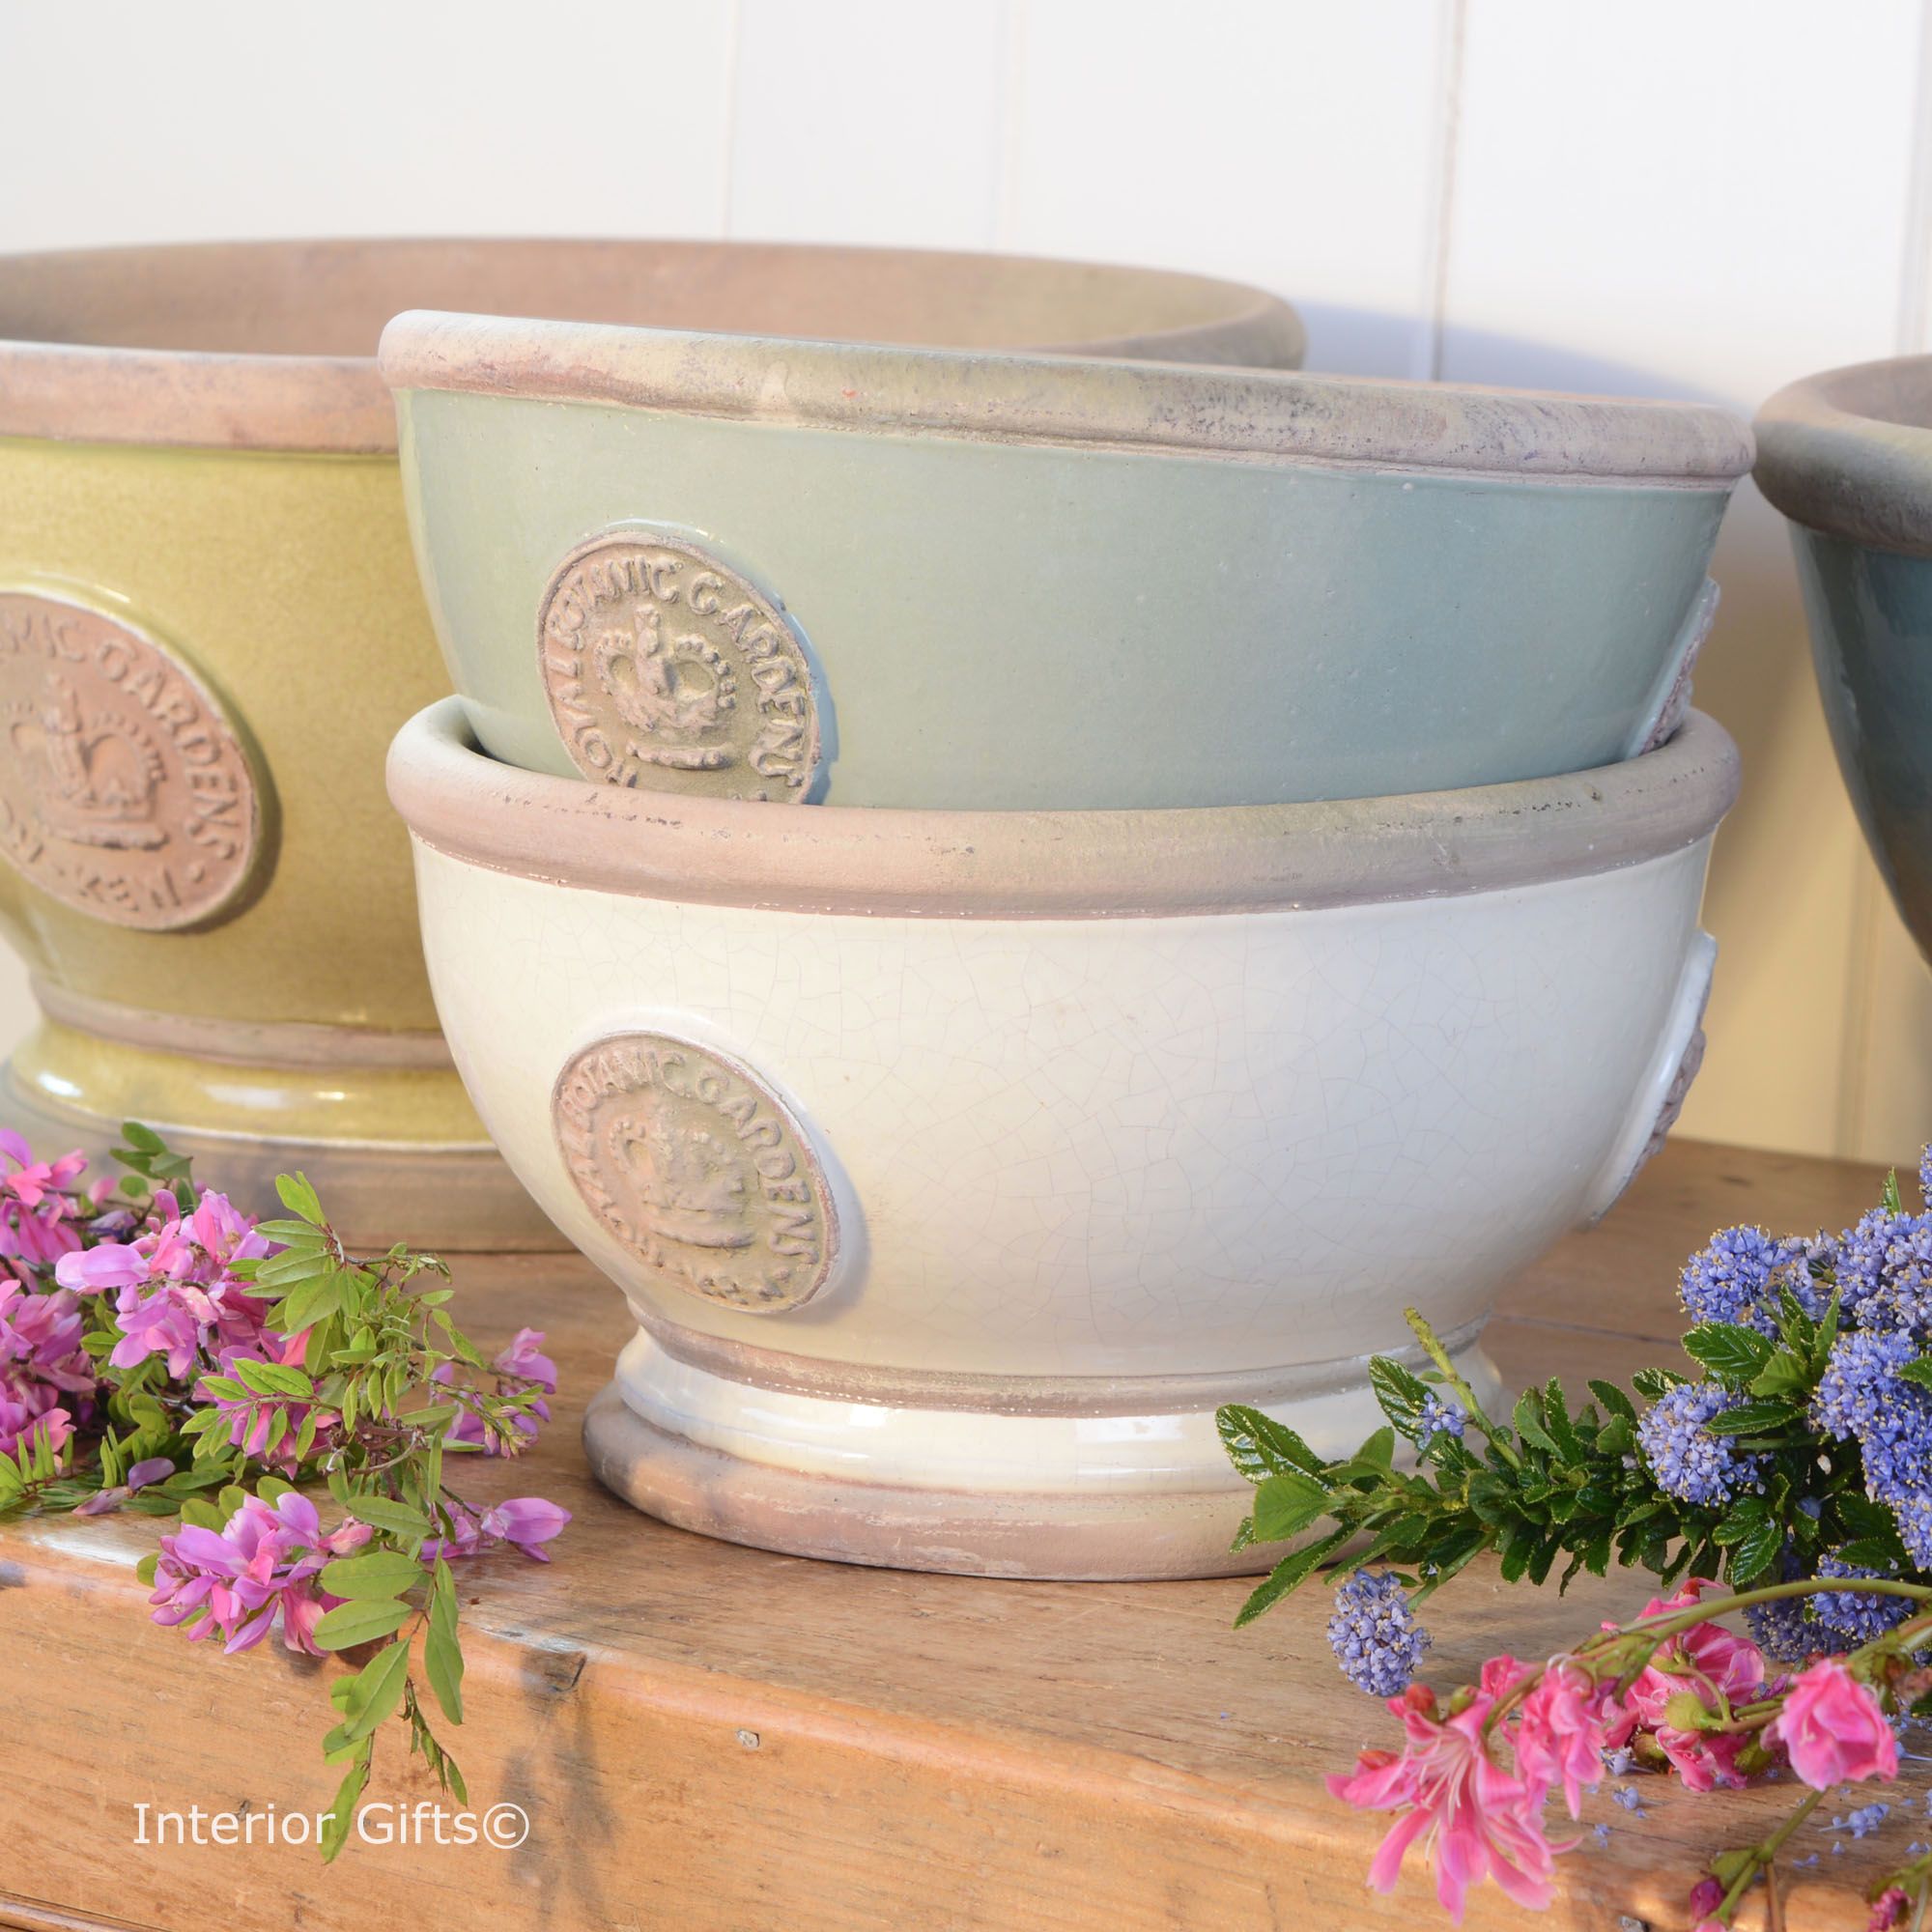 Kew Garden Footed Bowls Terracotta Glazed with Heritage finish